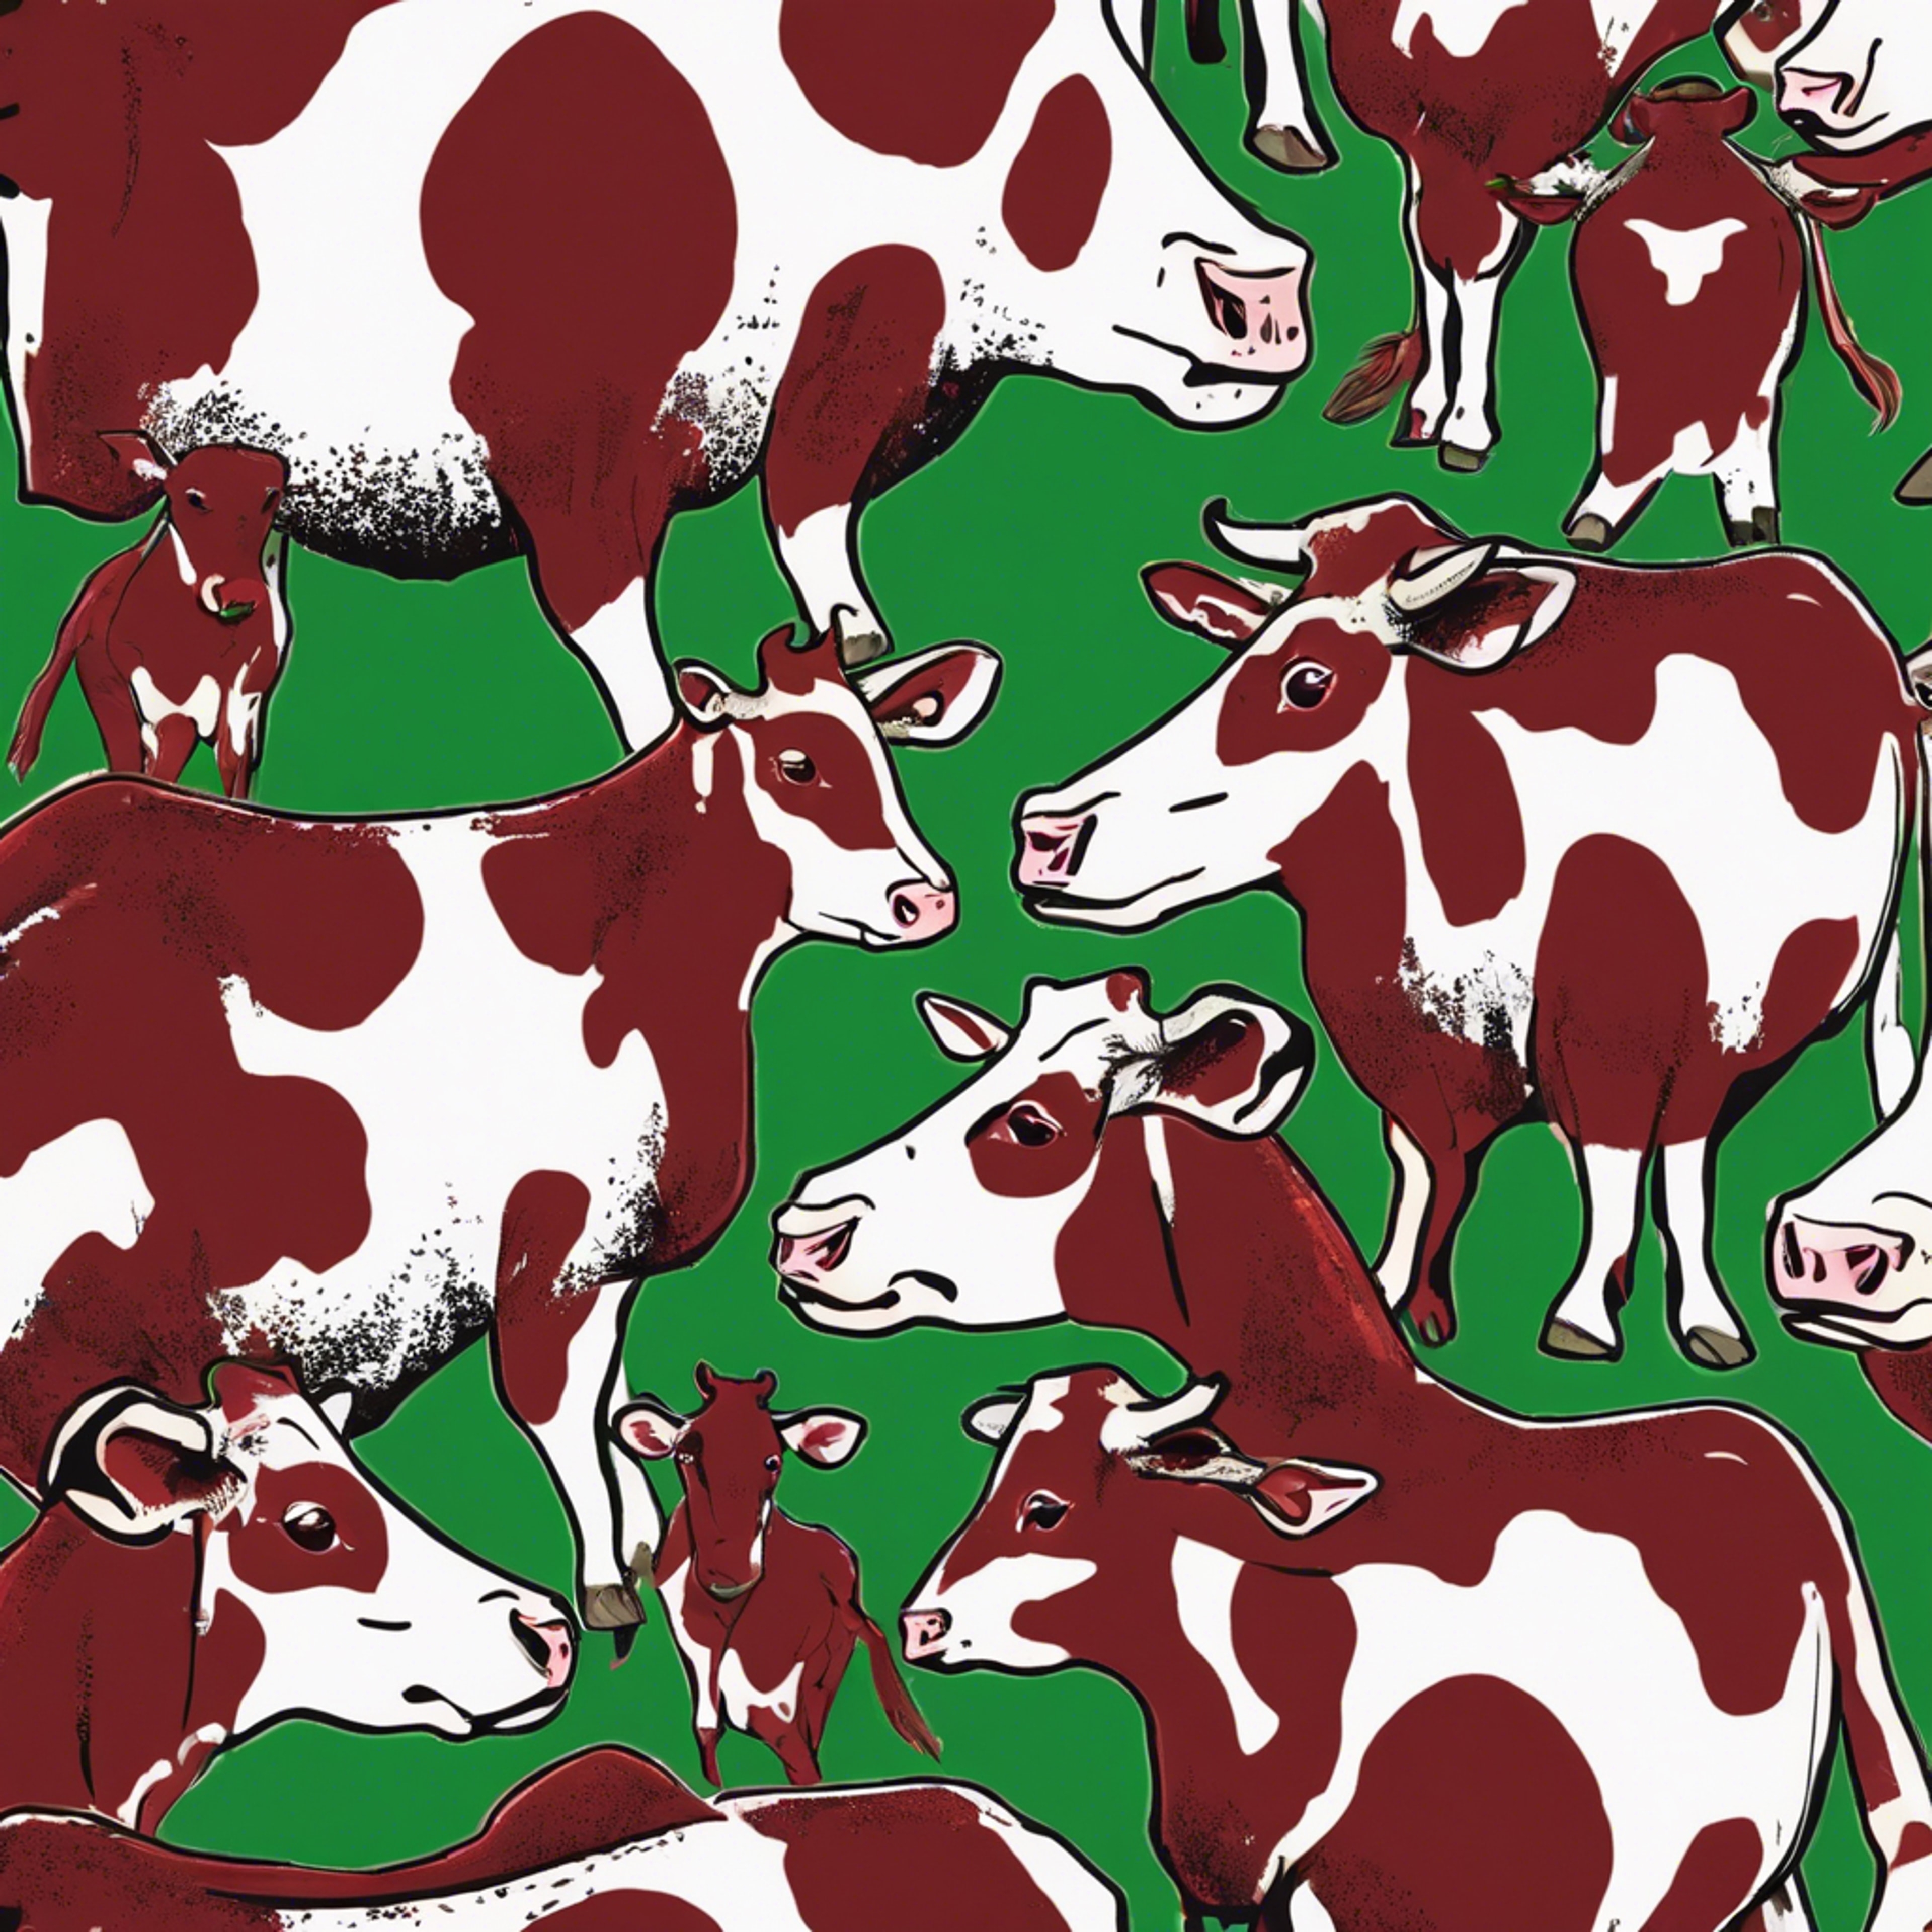 Cow spots in a mixed arrangement of rich red and fresh green. Валлпапер[f1cd1f055c9d420f9ac5]